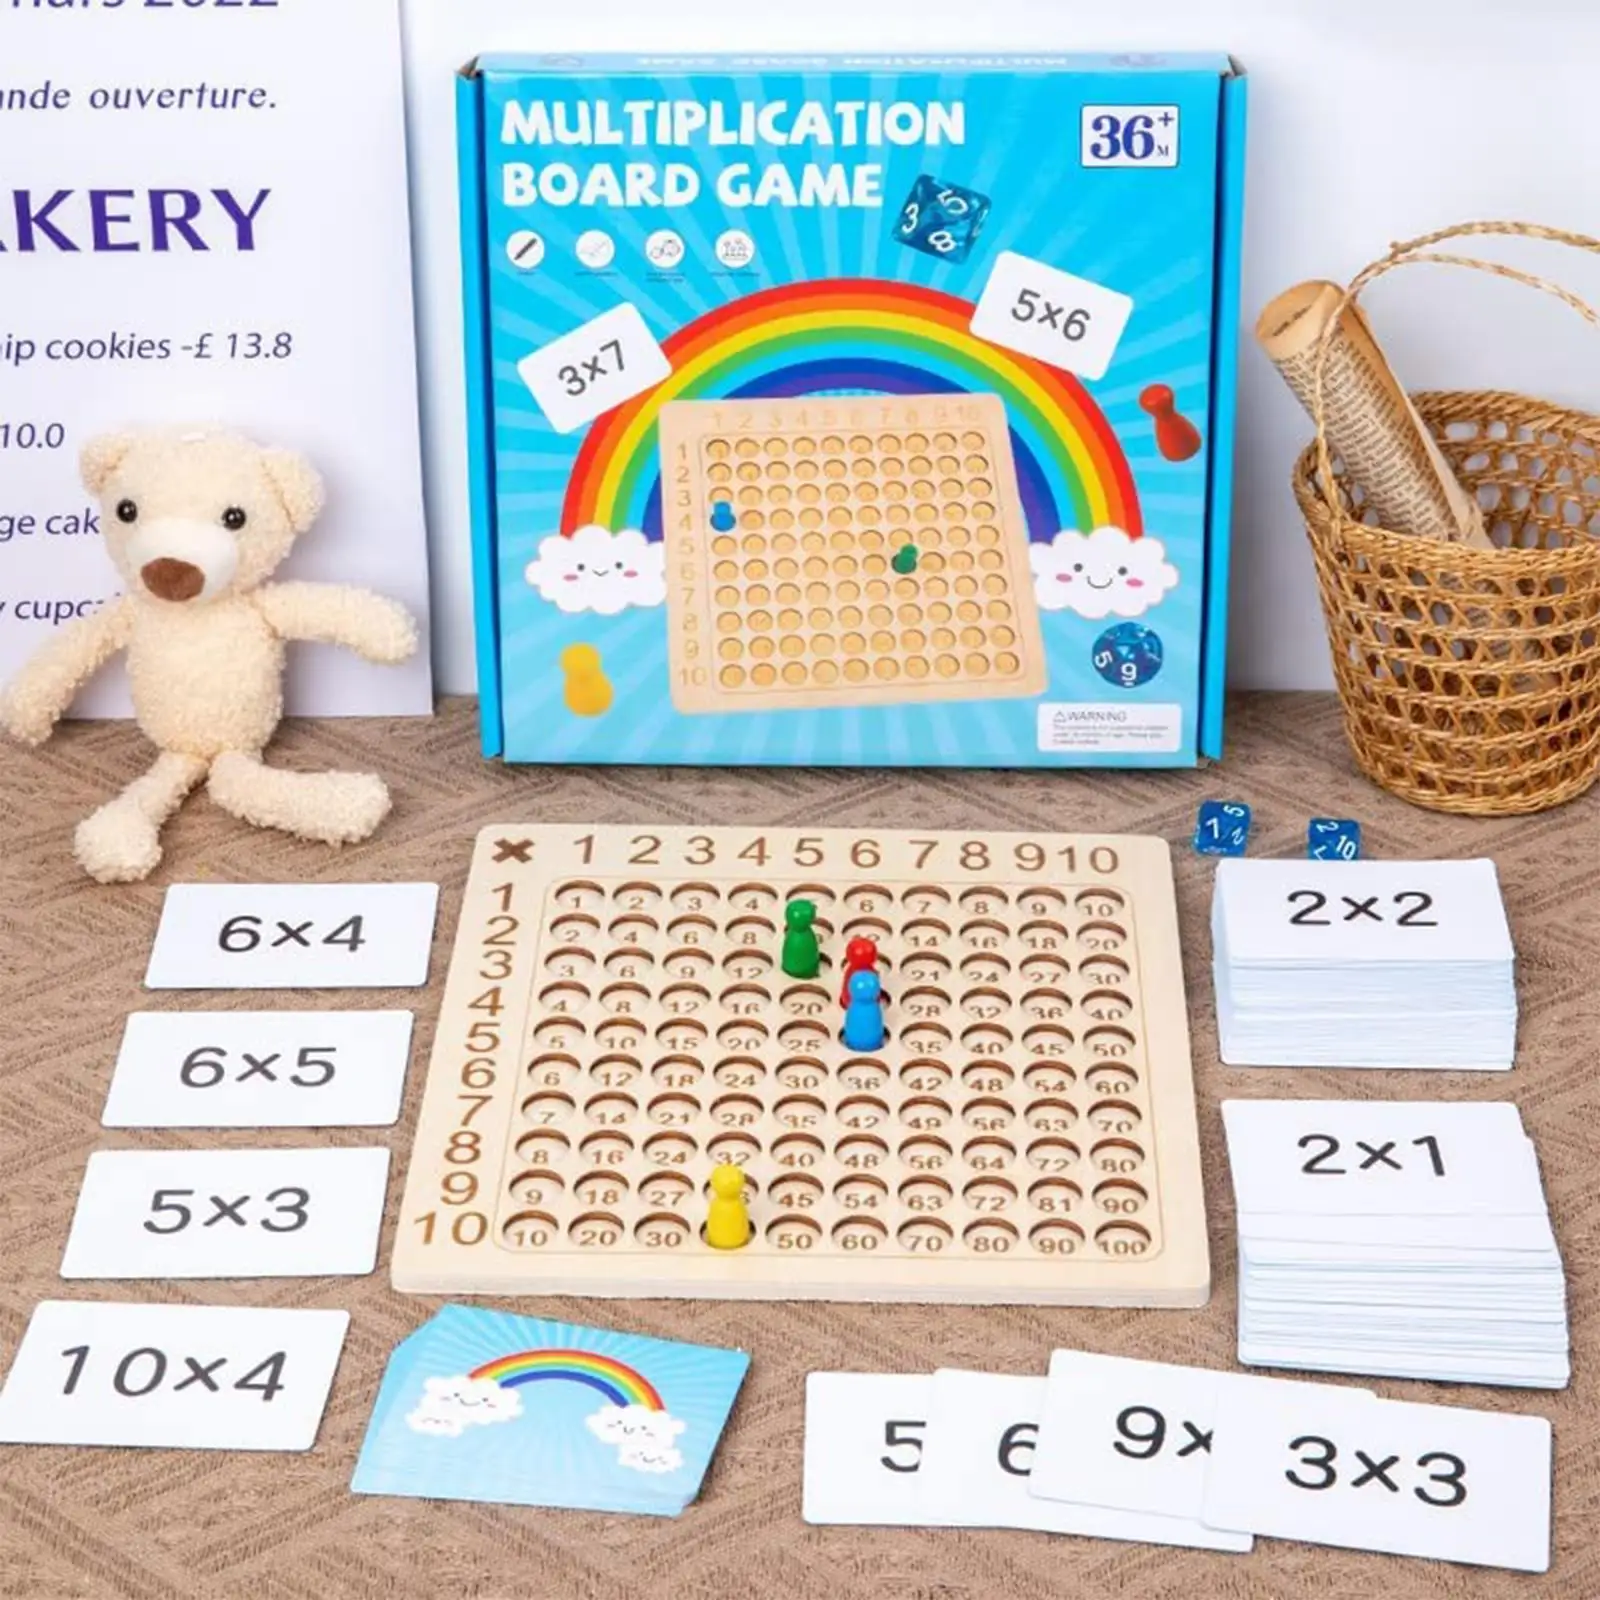 

Montessori Wooden Multiplication Board Game Children Counting Interactive Toys Hundred Thinking Educational Math Board Game U9n8